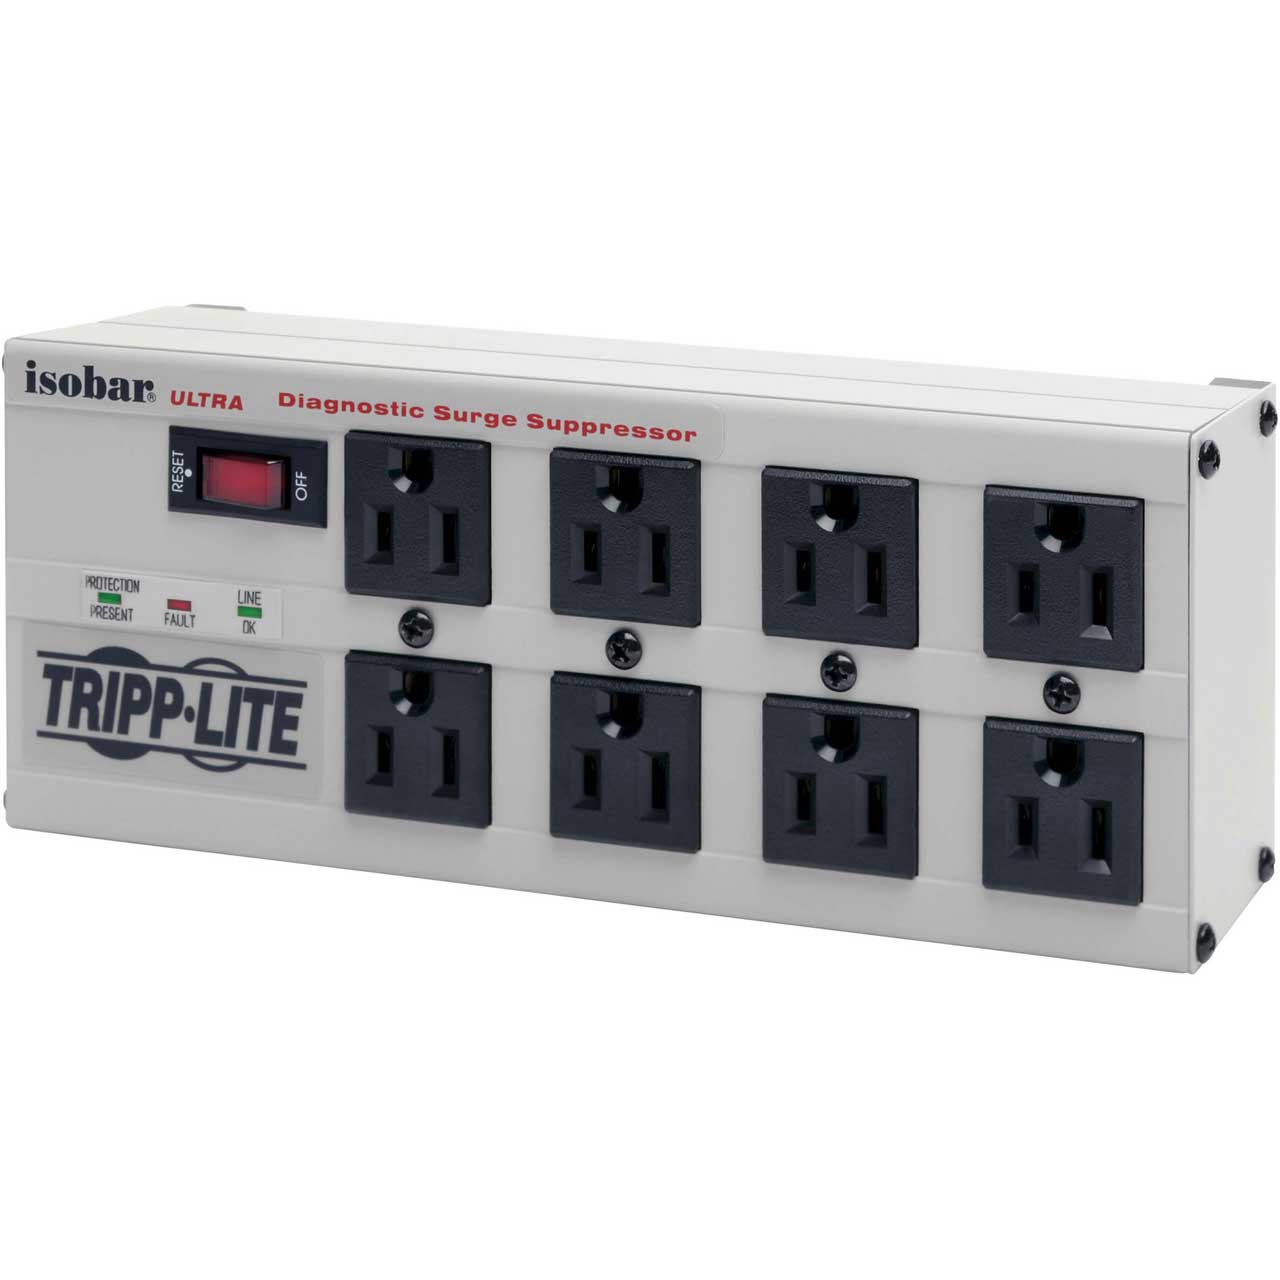 Tripp Lite ISOBAR8ULTRA 8-Outlet All Metal Housing Isobar Surge Suppressor